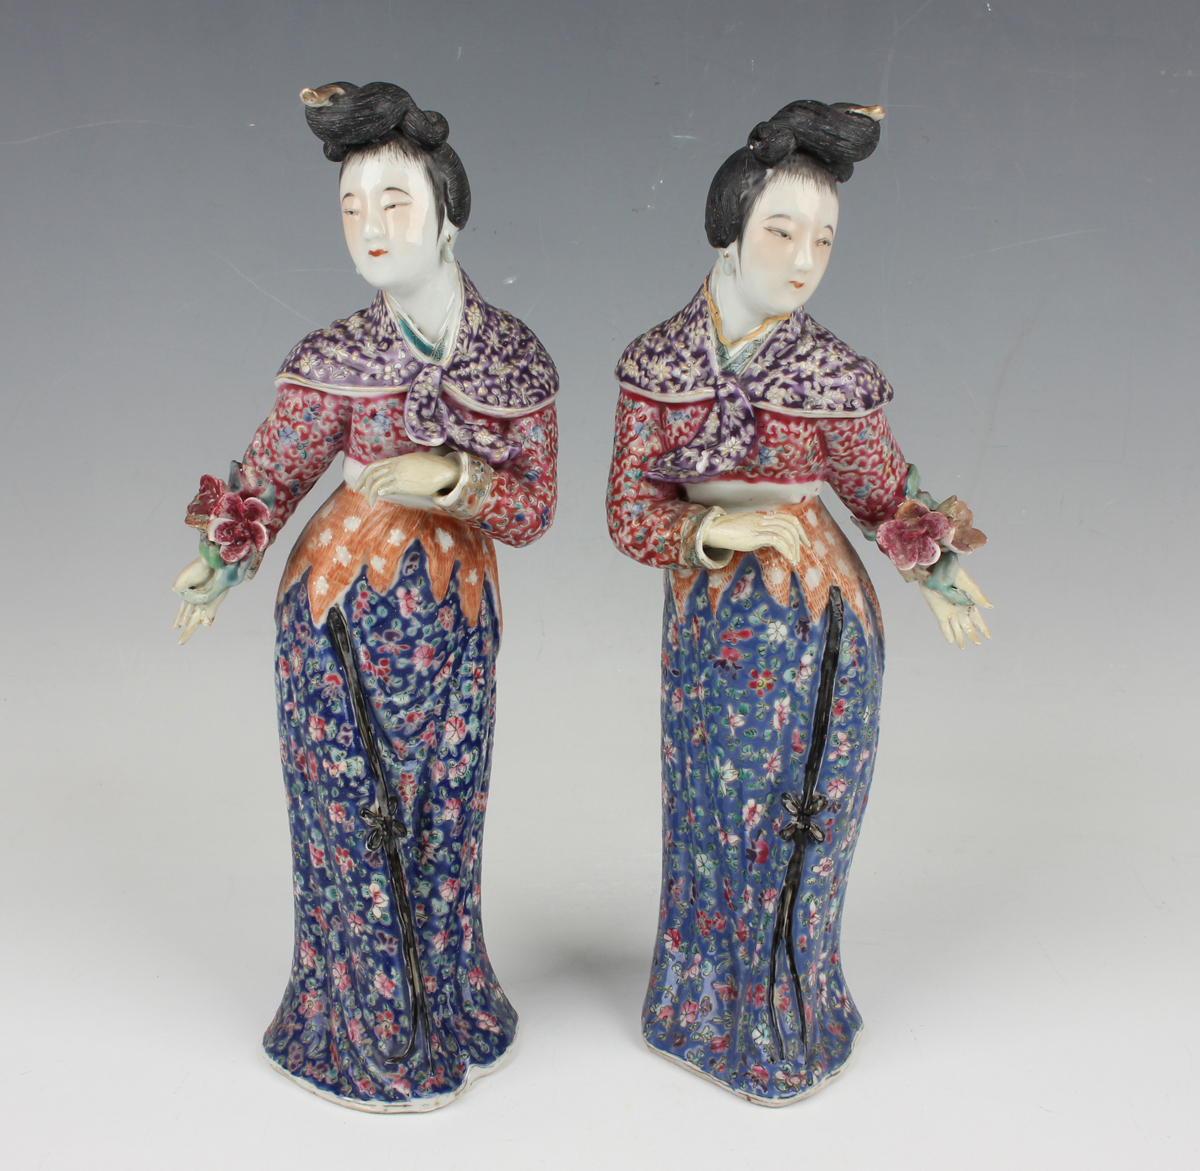 A pair of Chinese famille rose enamelled porcelain figures of maidens by Wei Hong Tai, late Qing